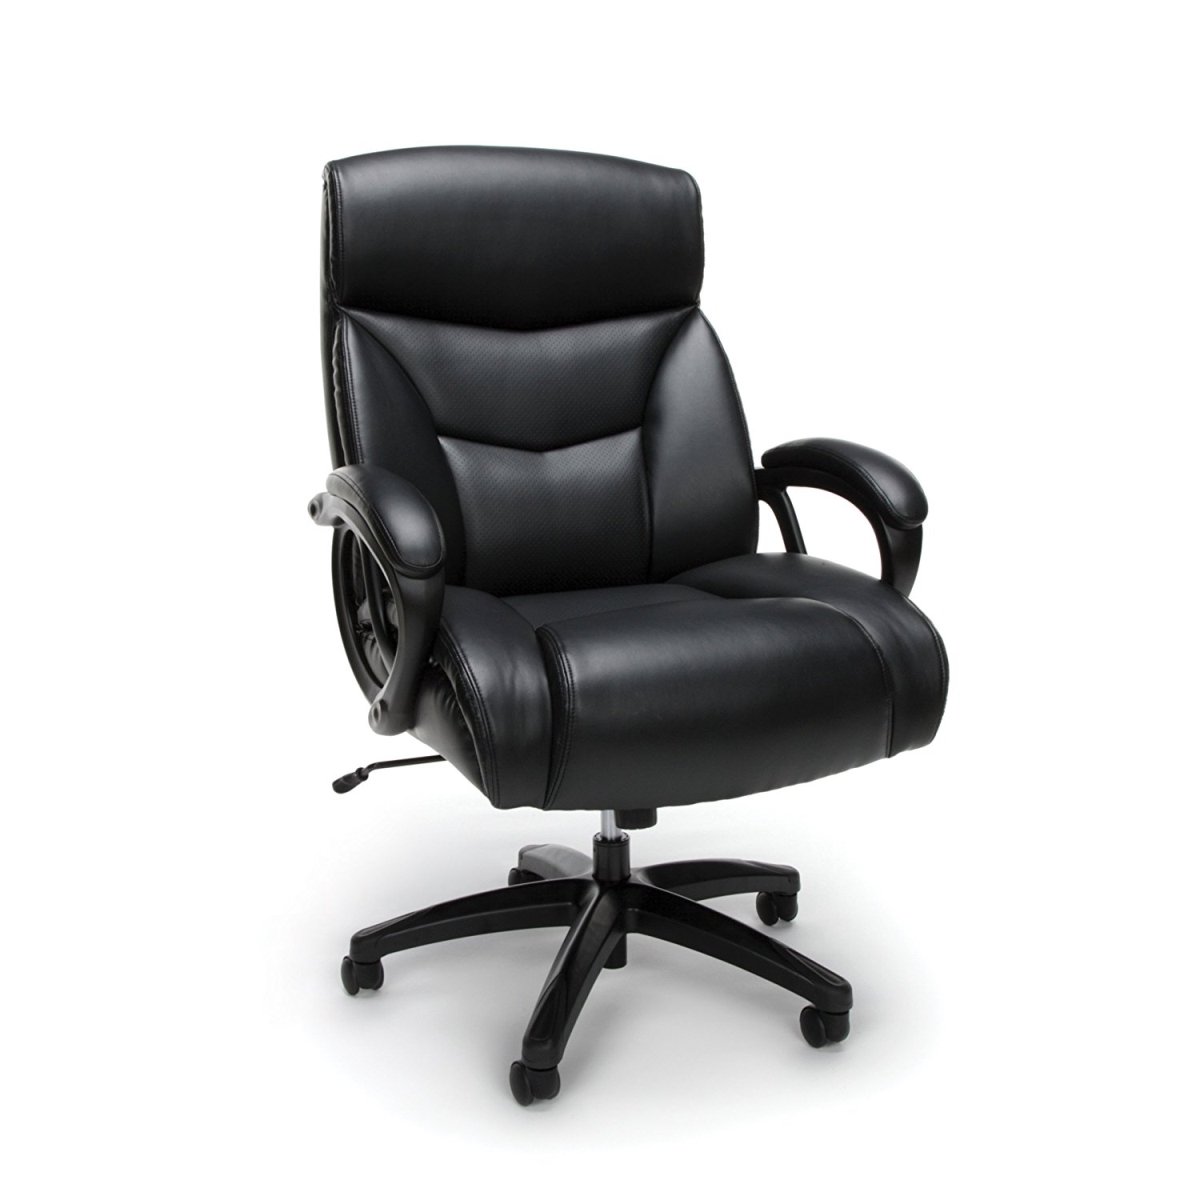 Ess-6040-blk Essentials Big And Tall Leather Executive Chair, Black